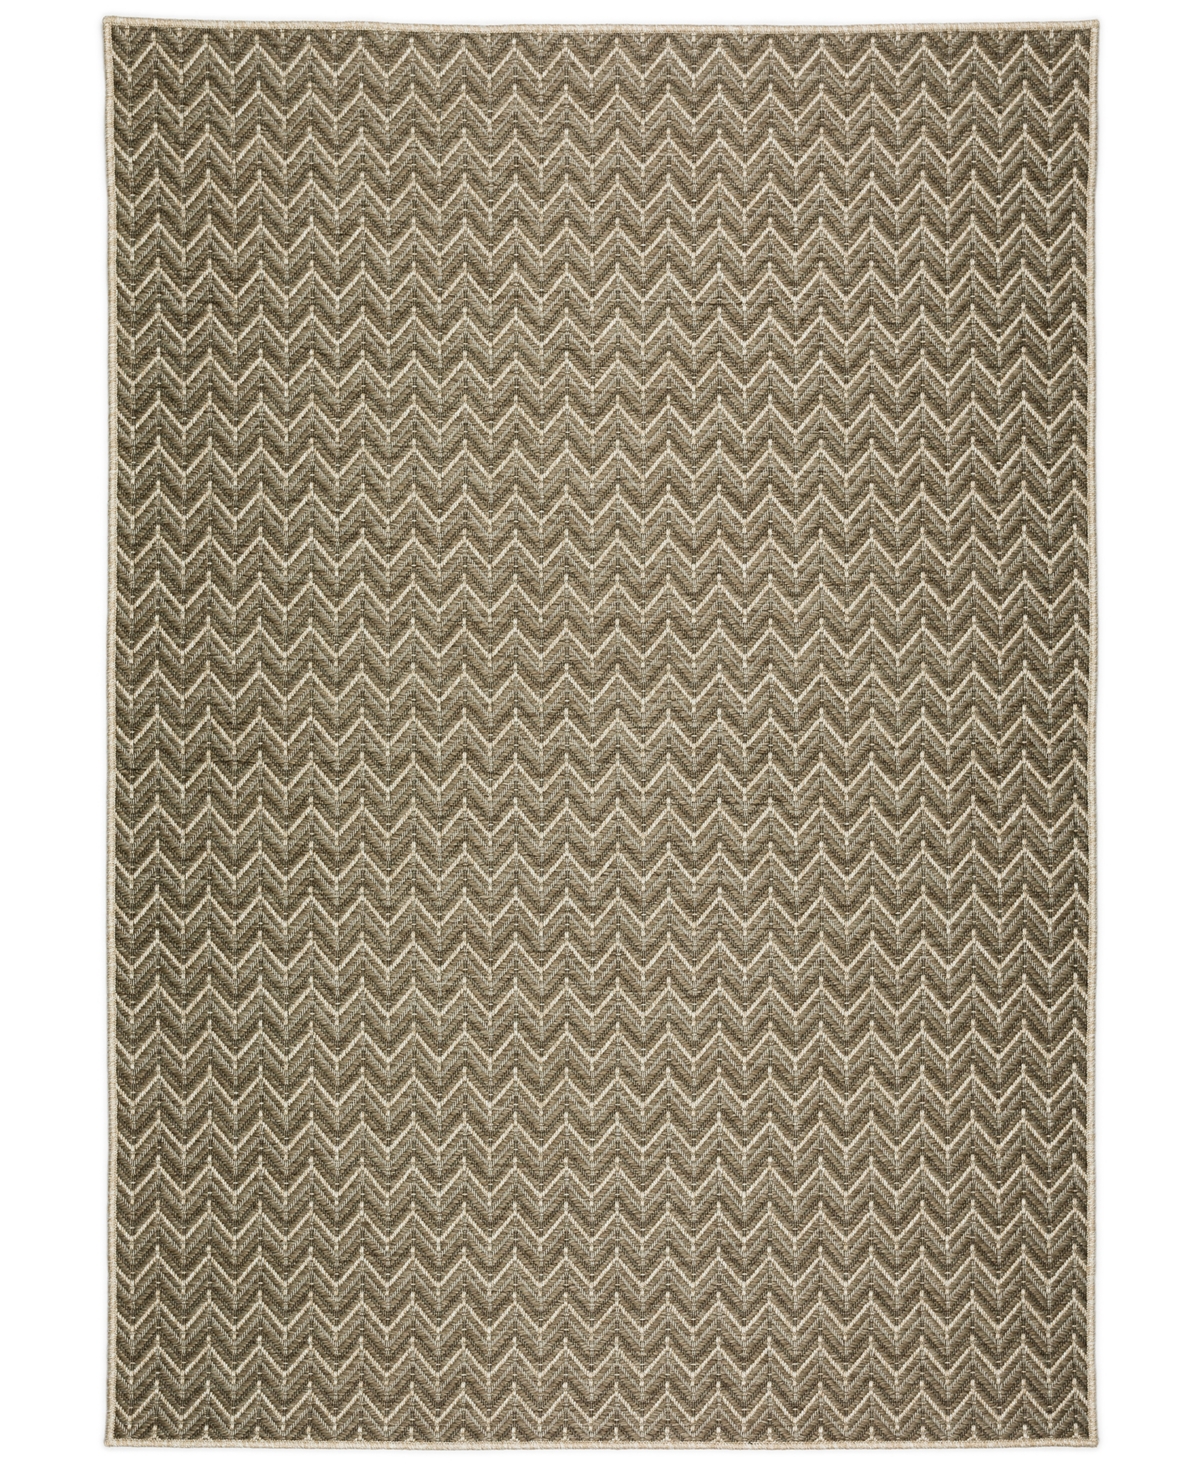 D Style Nusa Outdoor Nsa1 12' X 15' Area Rug In Gray